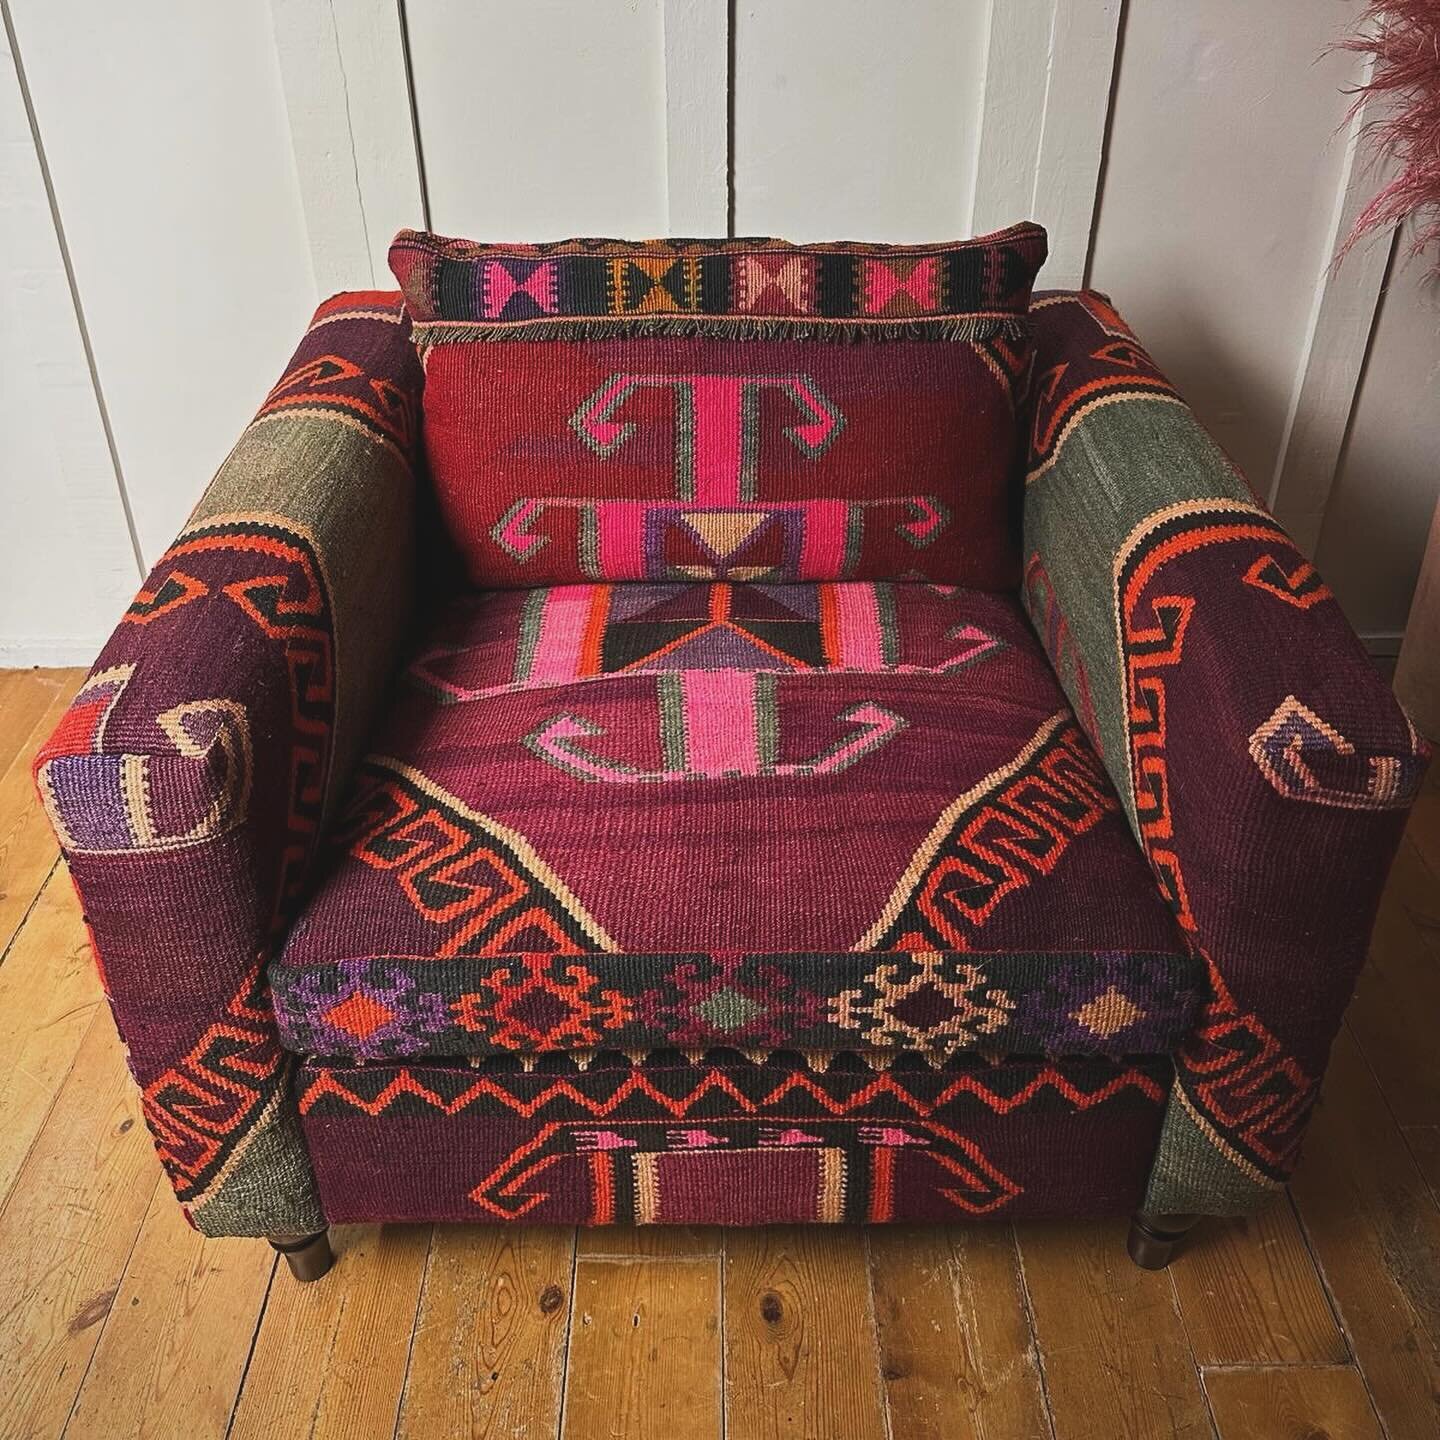 A client came to us recently with an exciting project. To turn her kilim rug into a bespoke one off armchair. She already had the rug and knew exactly what she wanted the finished product to look like. We worked with her to create her vision and this